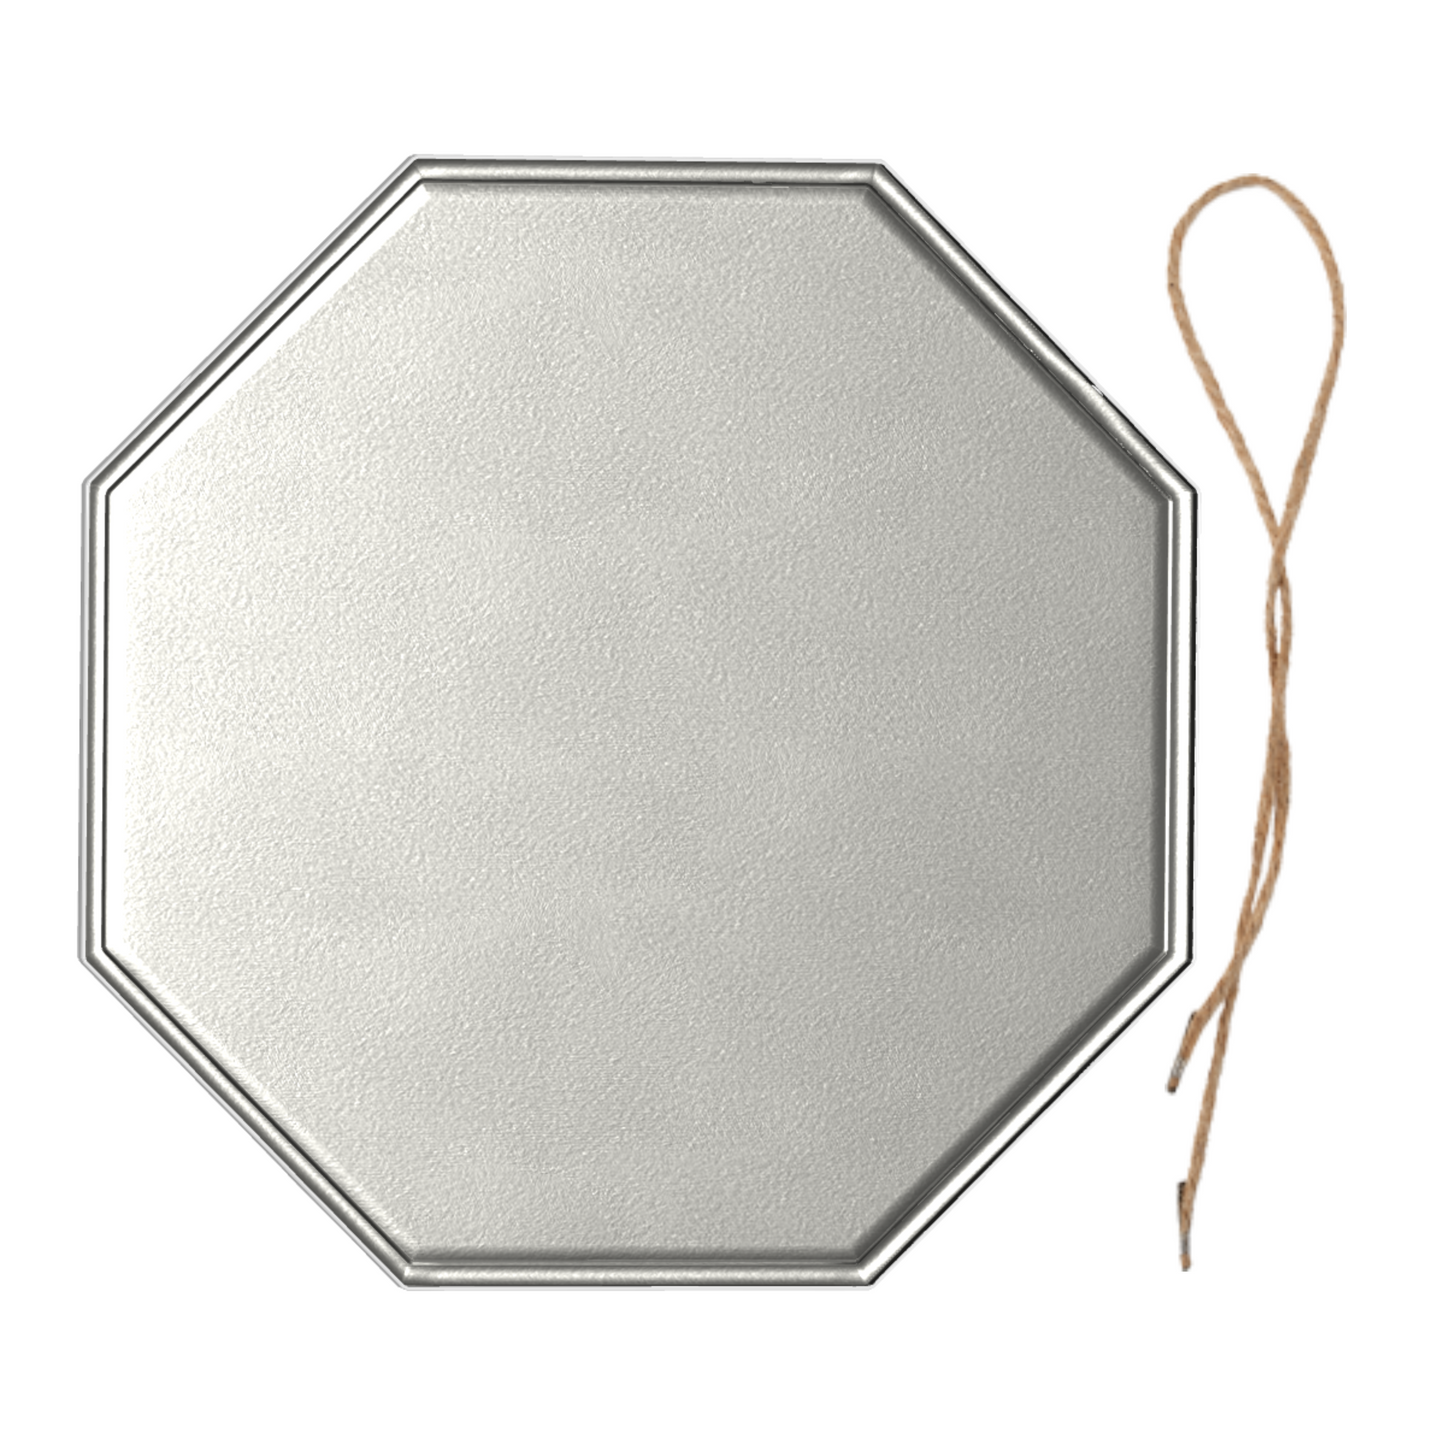 Octagonal Shape Metal Decor - Upload Your Own Picture